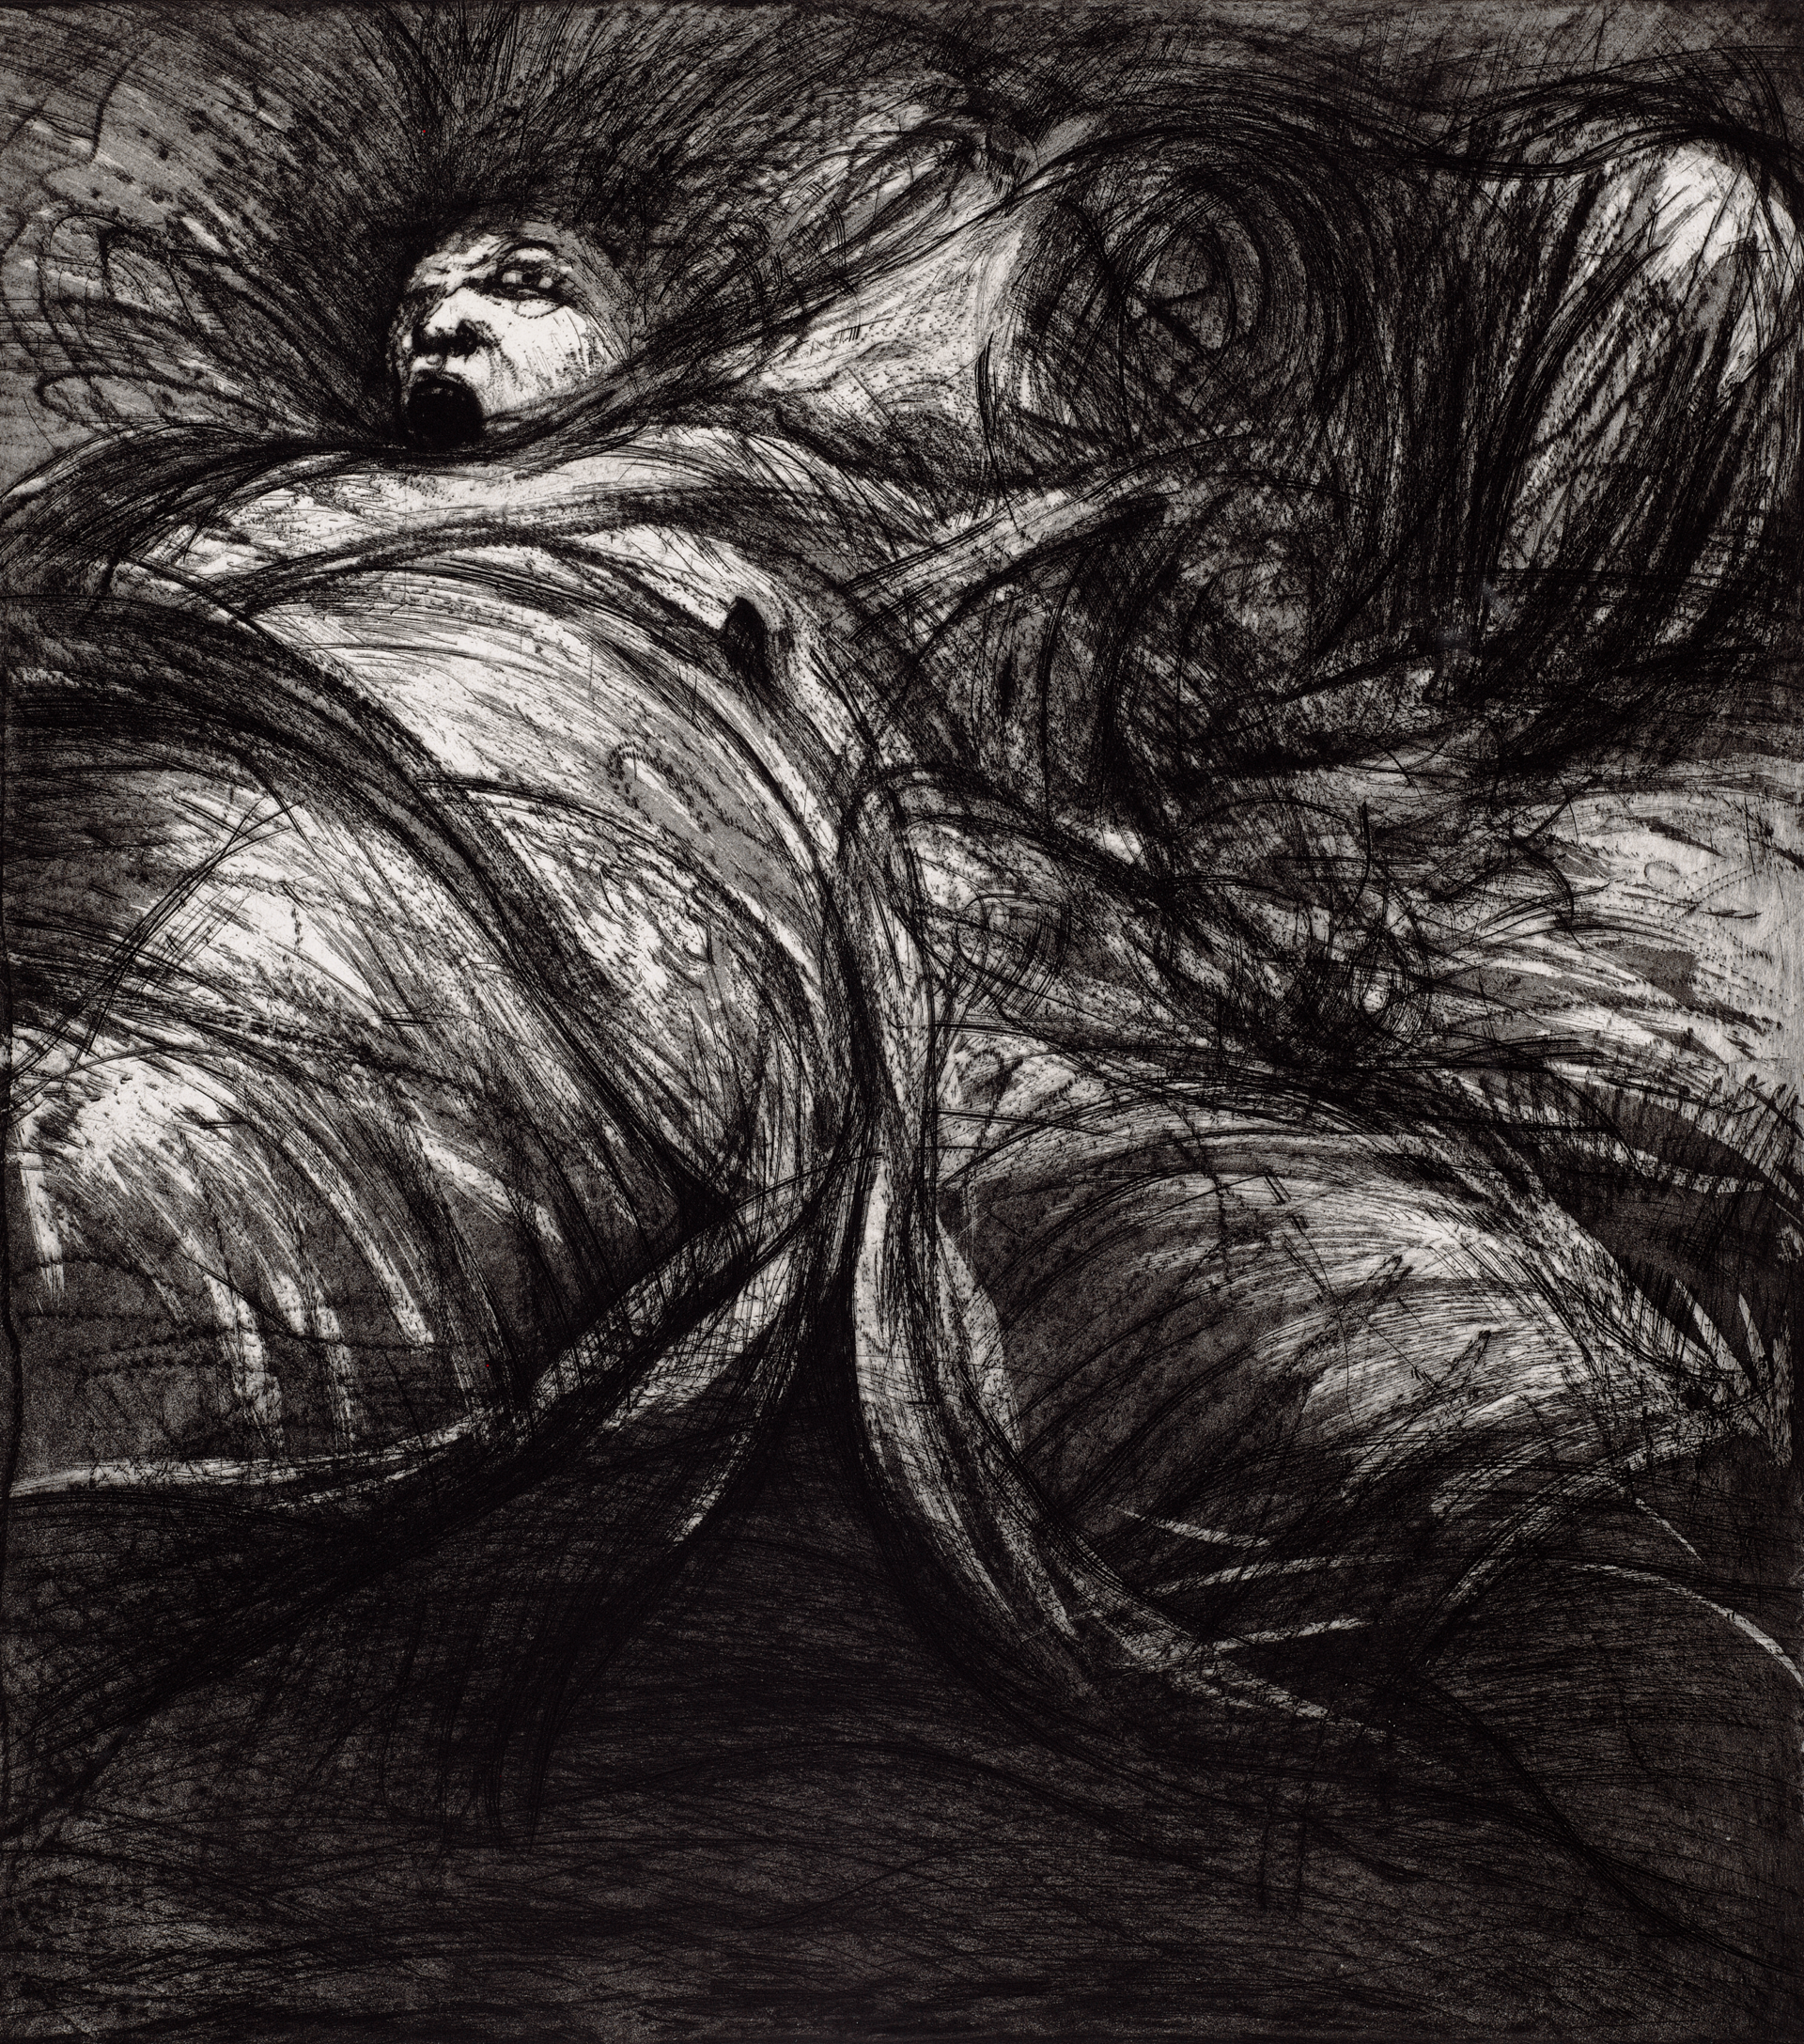 An energetic etching composed of large scrawled strokes depicts a screaming man, collapsed, and wrapped in cloth.